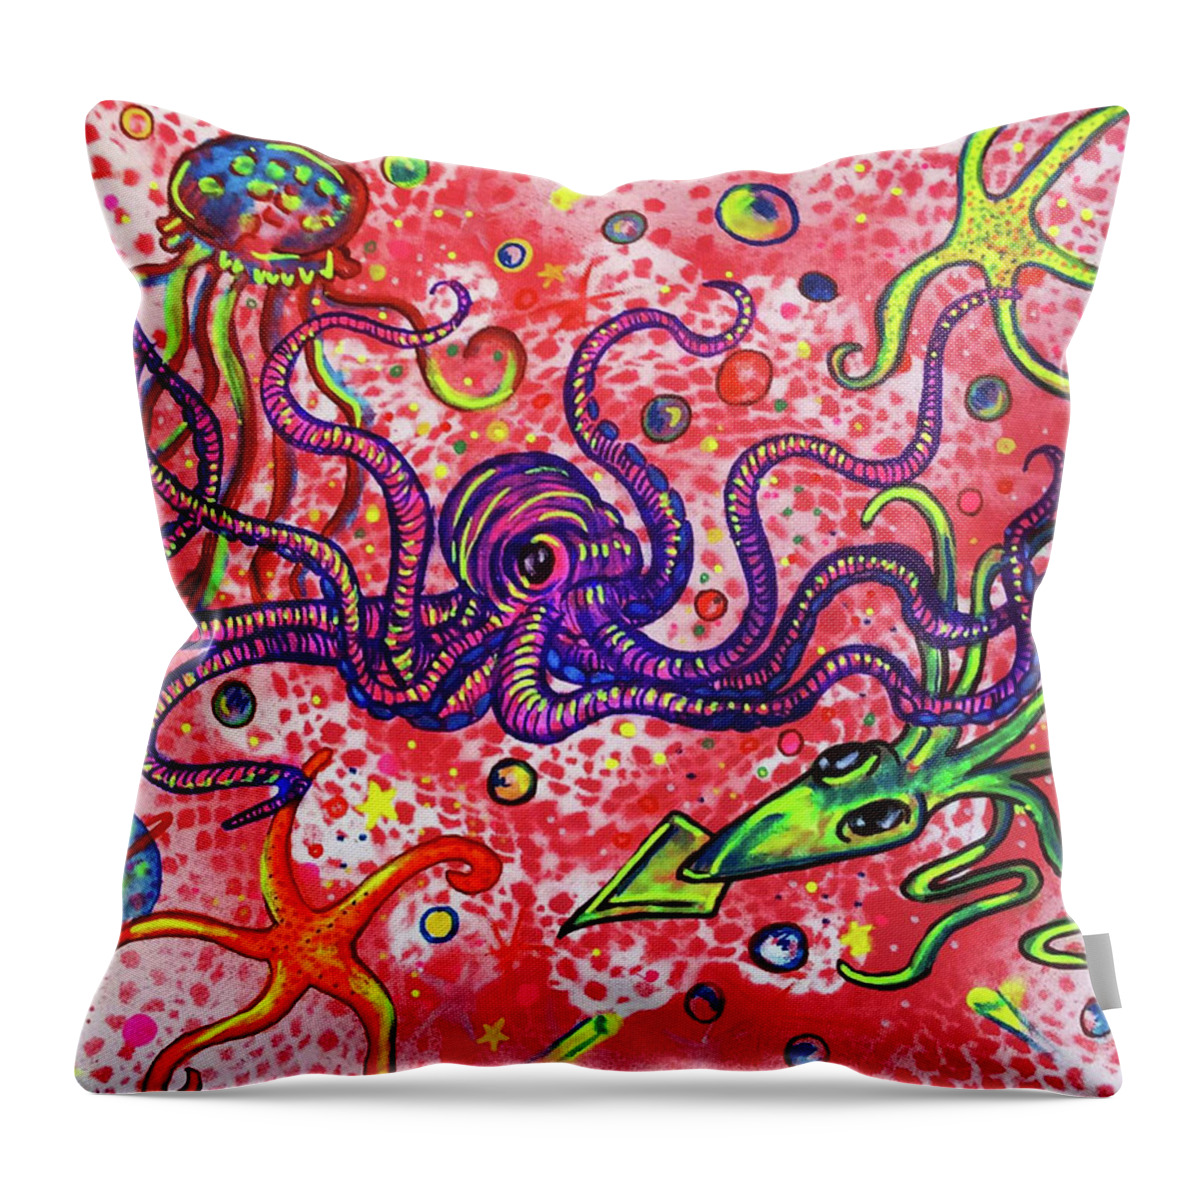 Octopus Critters Creature Lace Spray Paint Acrylic Bright Neon Squid Plants Jellyfish Starfish Planetary Bubbles Psychedelic Groovy Colors Colorful Throw Pillow featuring the painting Sea Critters by Lori Teich